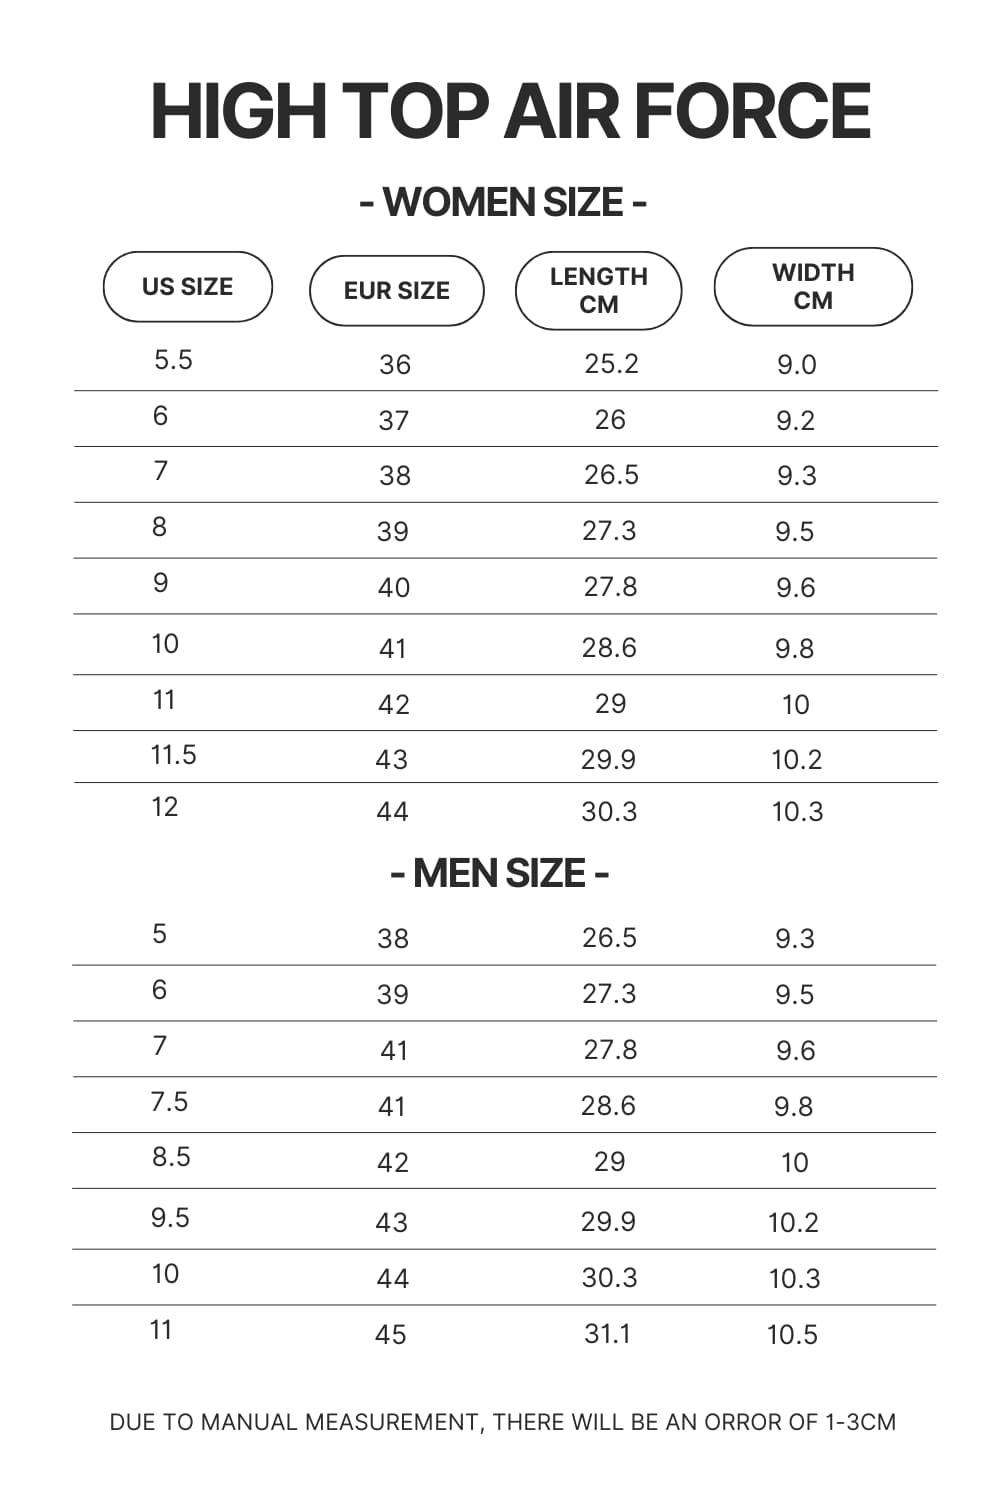 High Top Air Force Shoes Size Chart - Naruto Shoes